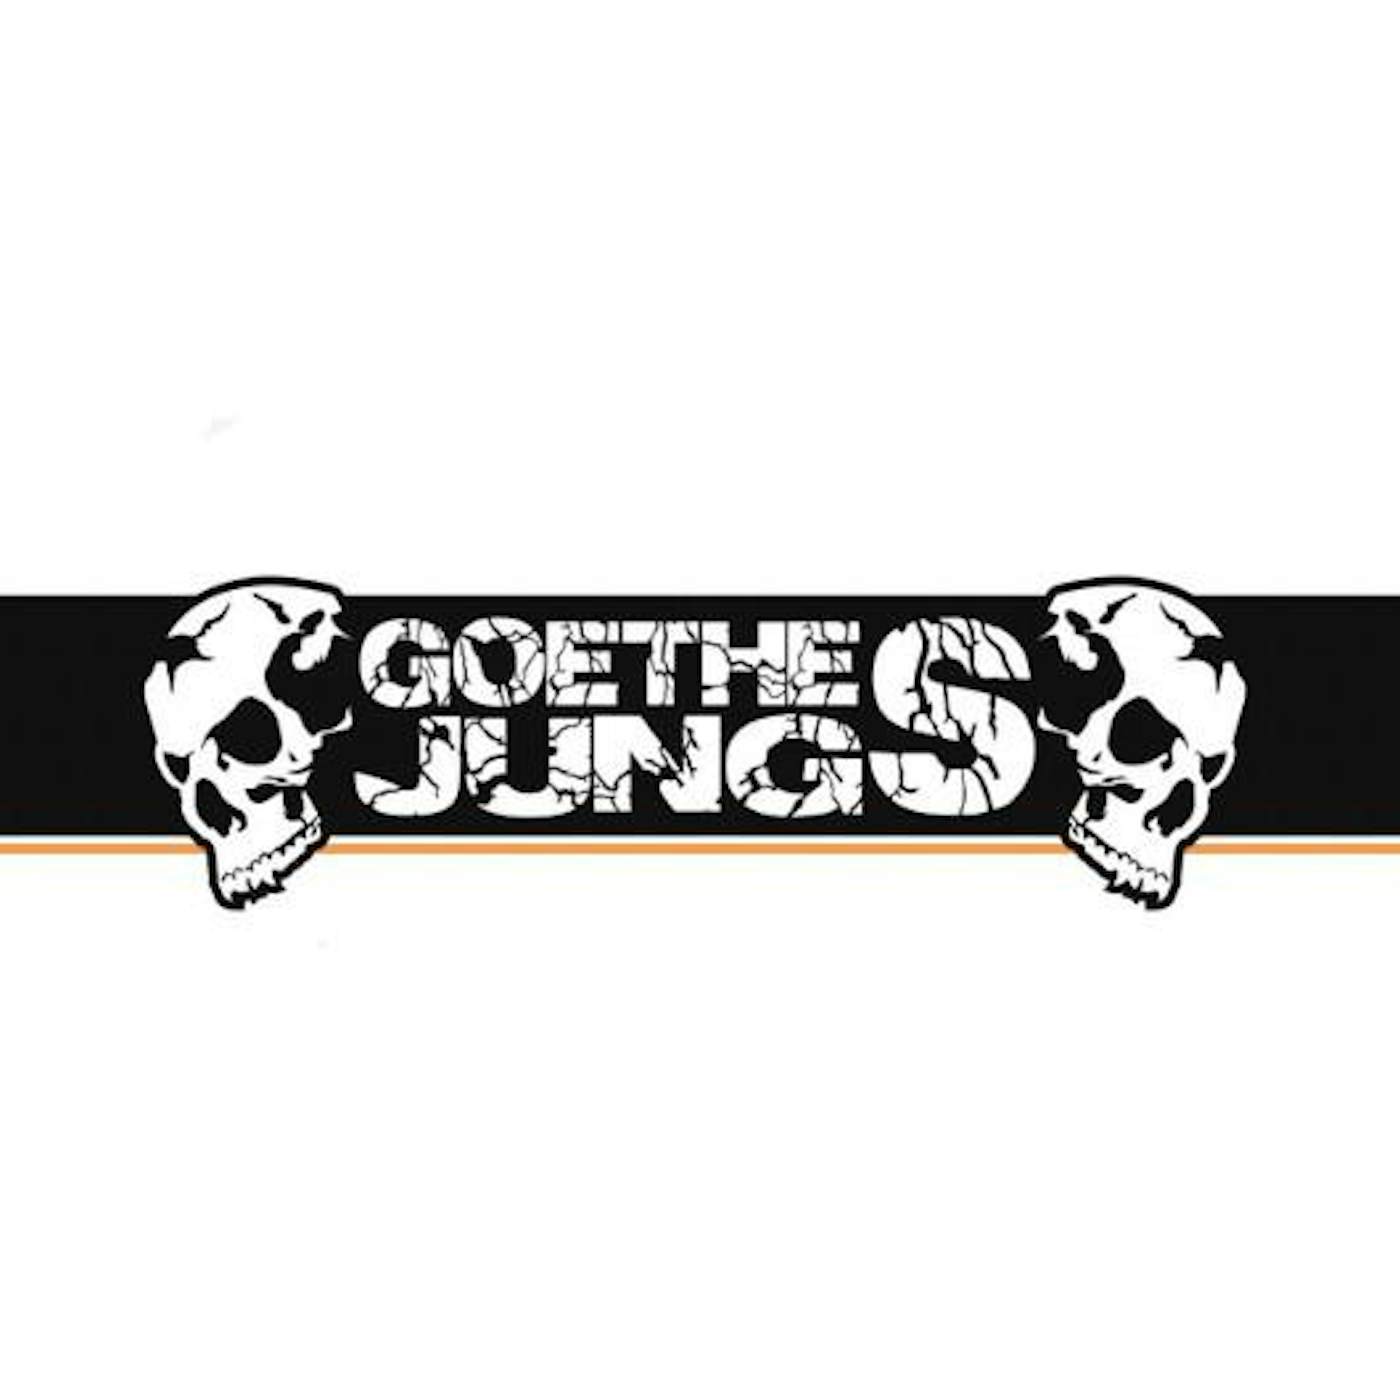 Goethes Jungs